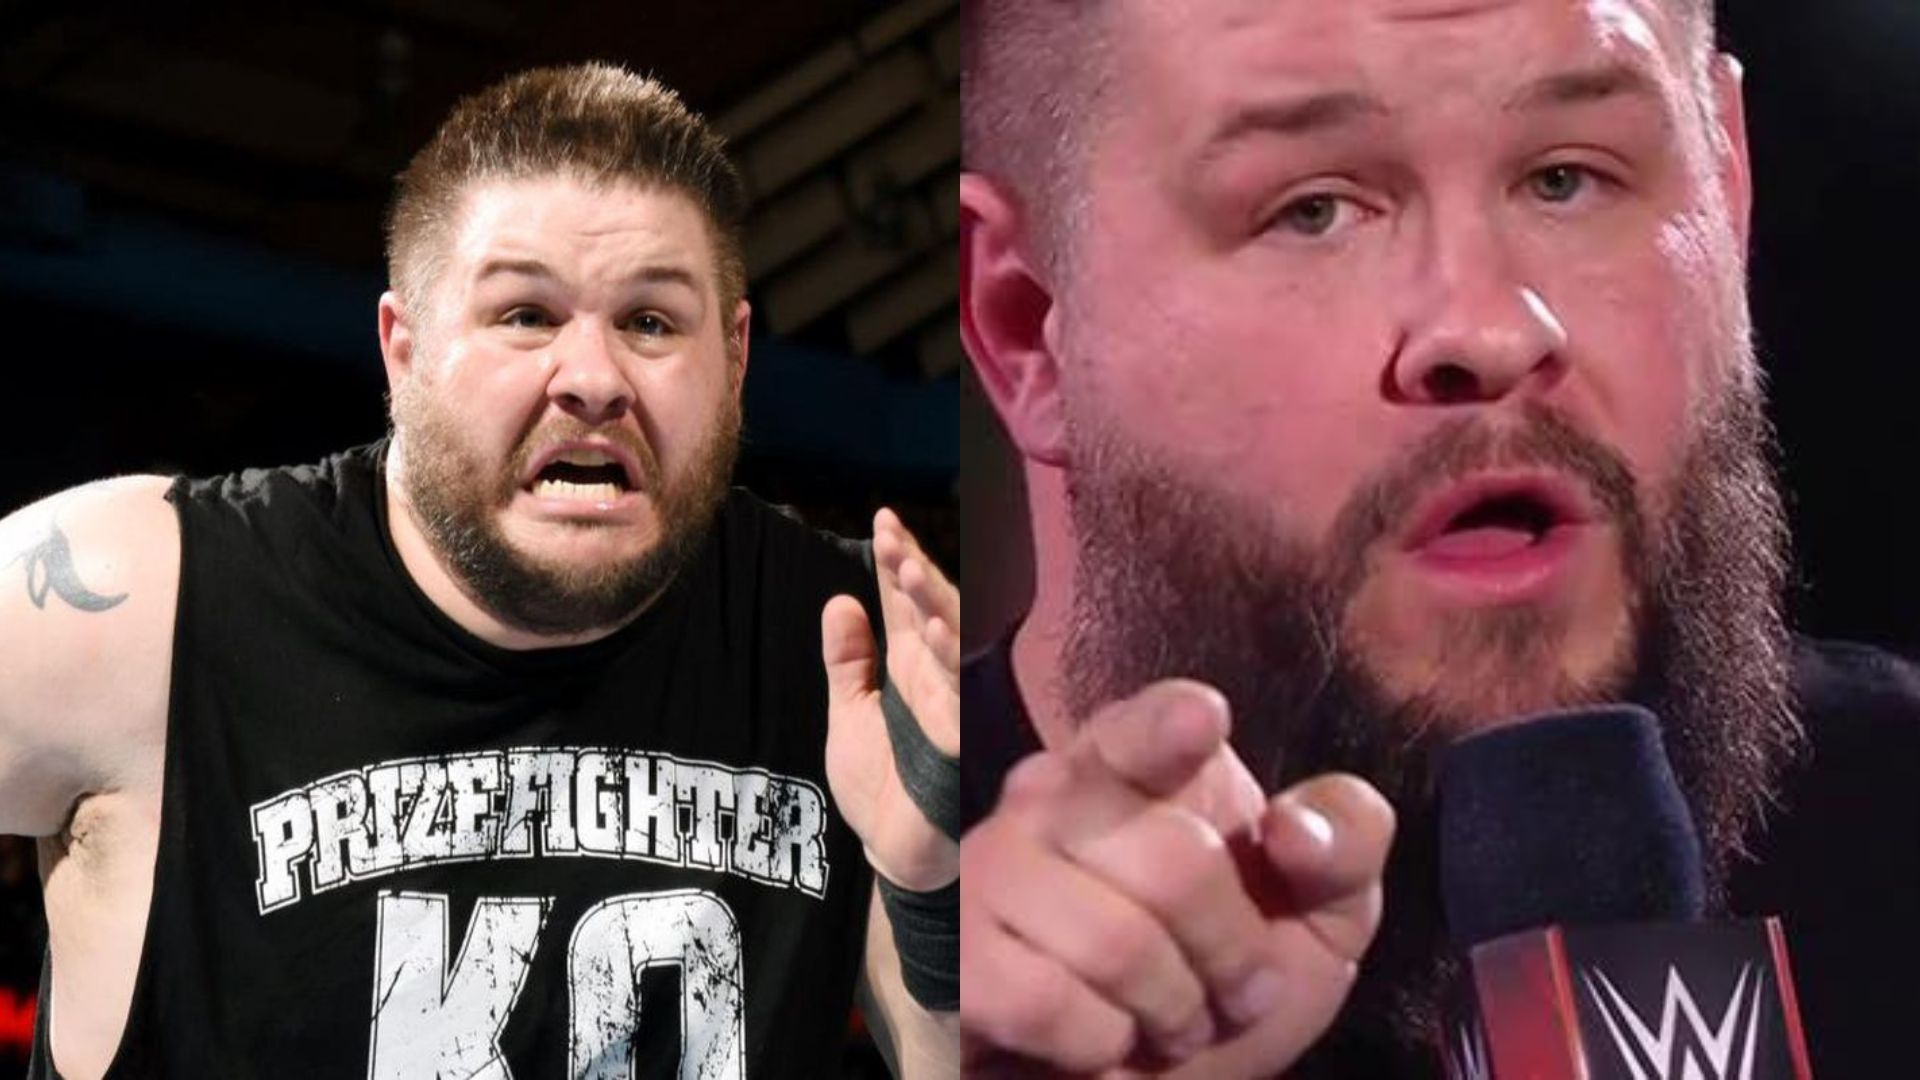 Kevin Owens recently moved to the SmackDown brand